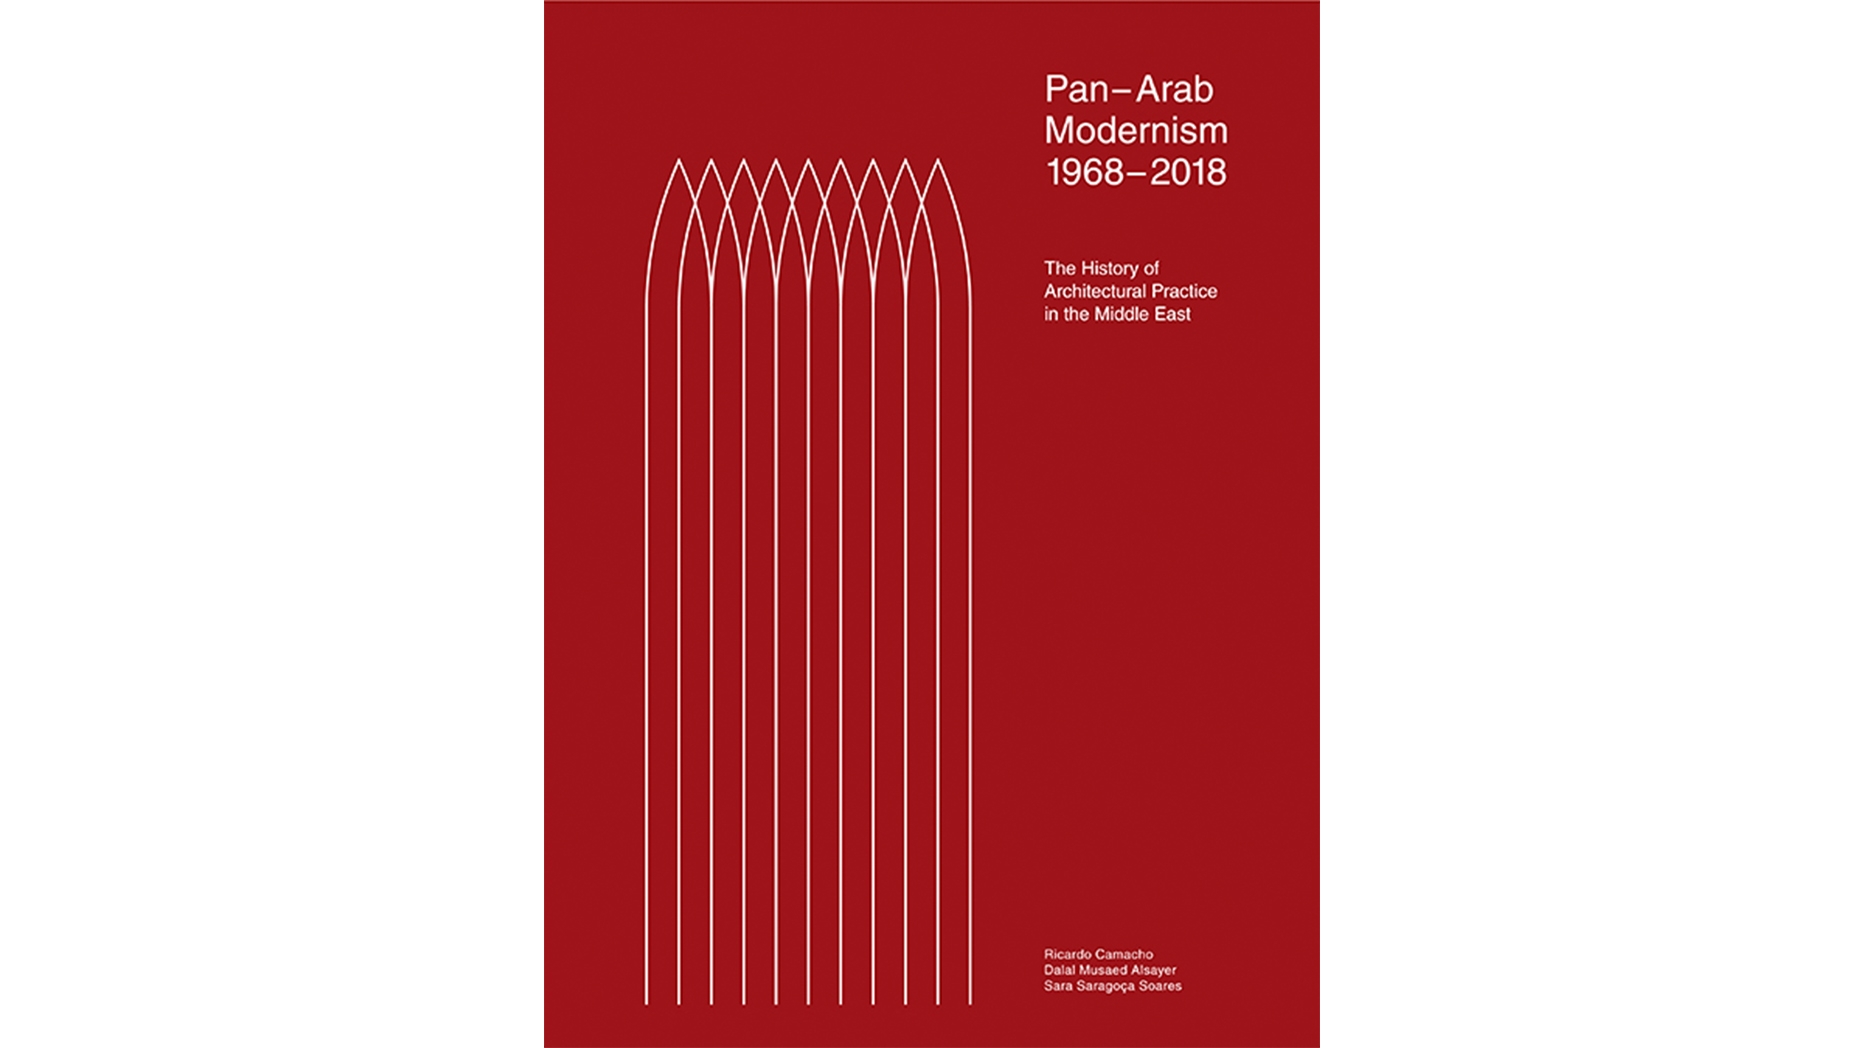 Cover image of Pan-Arab Modernism: A History of Architectural Practice in the Middle East, 1968-2018